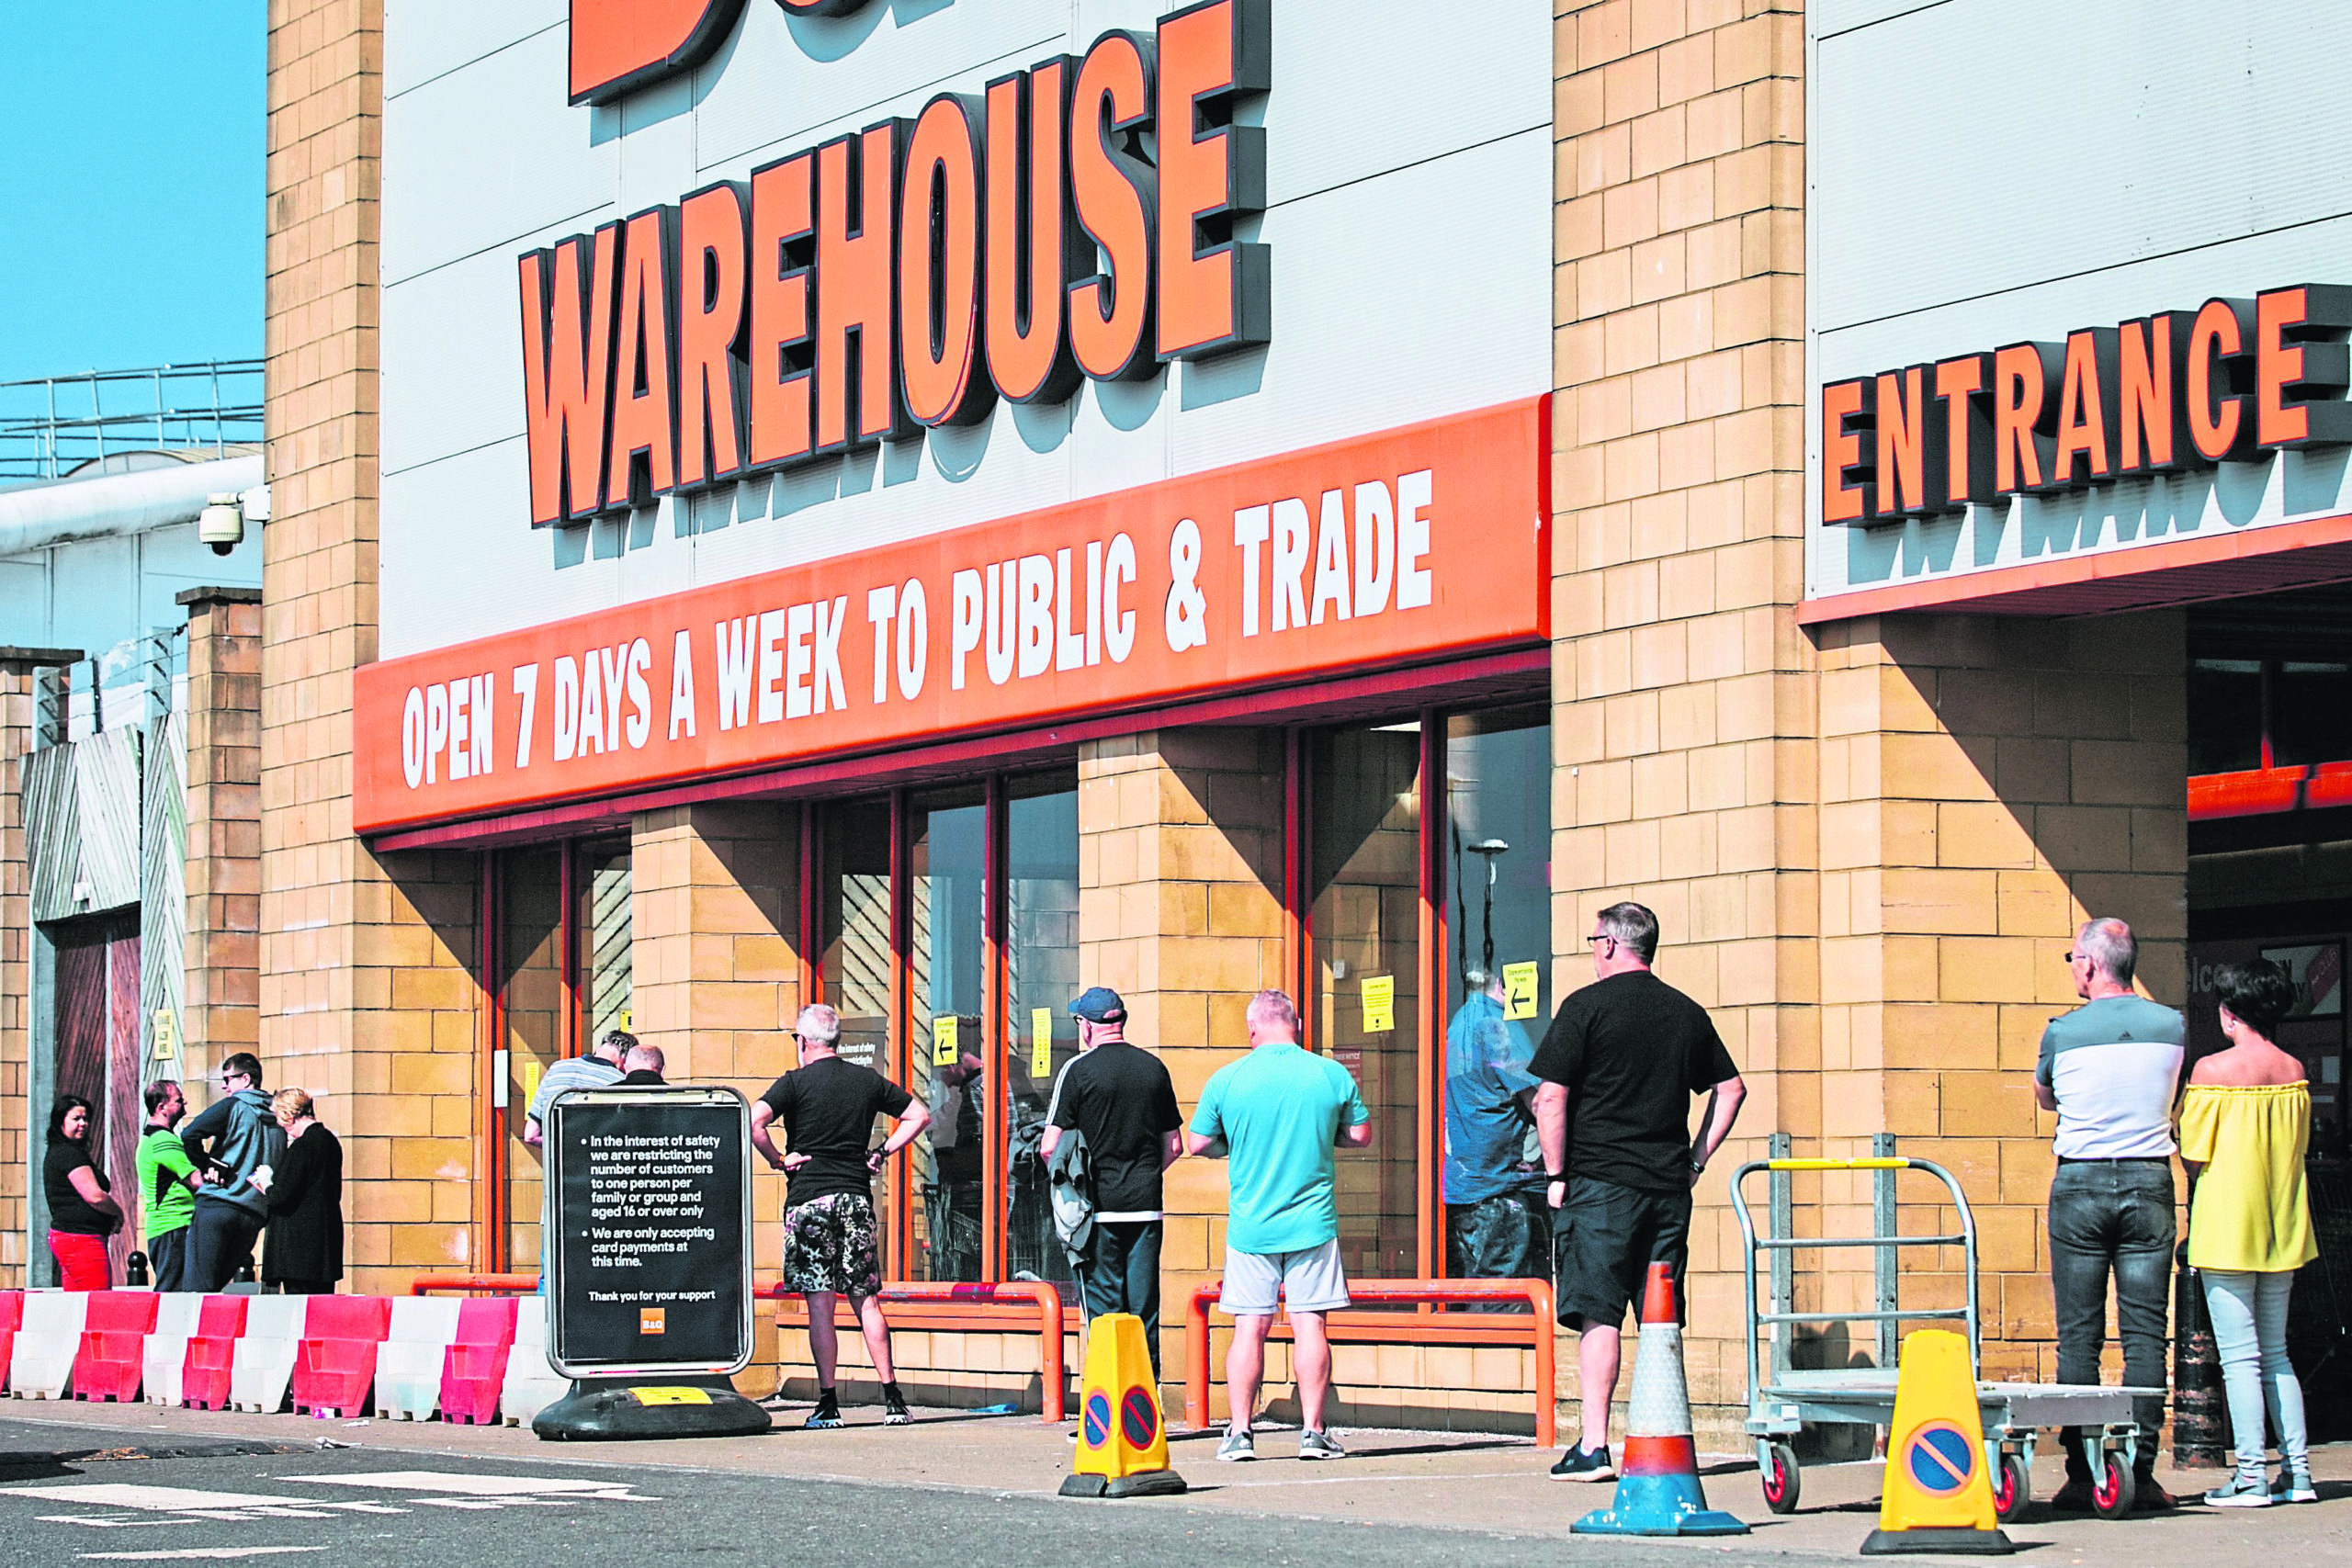 Shoppers observe social distancing as they queue outside B&Q.